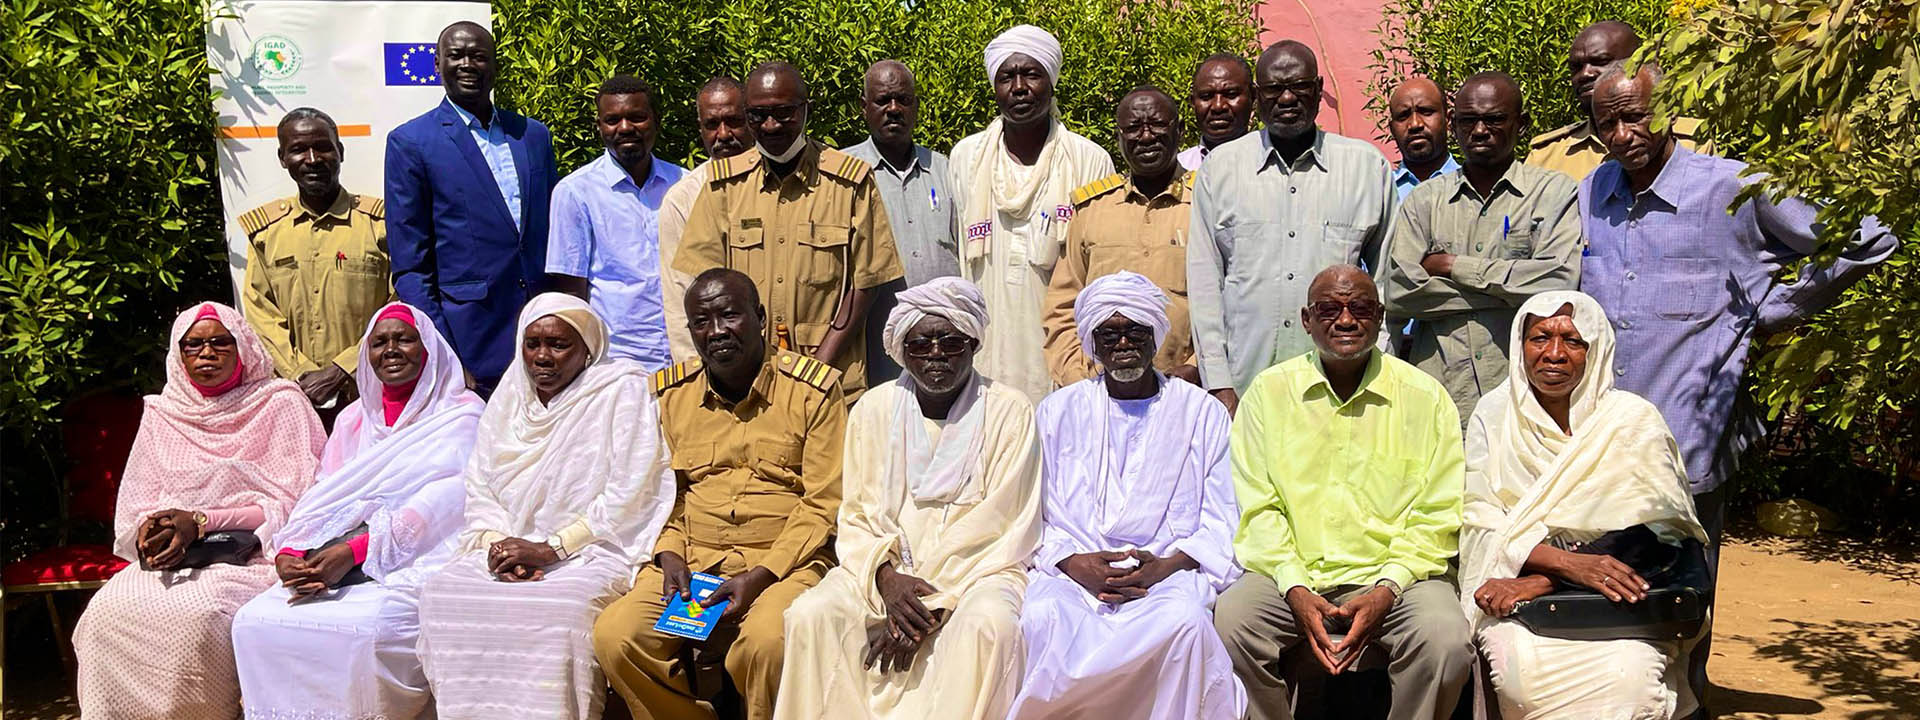 IGAD Engages Sudanese Local Authorities in Peace Building, Dialogue, Reconciliation, and Confidence-Building Measures.